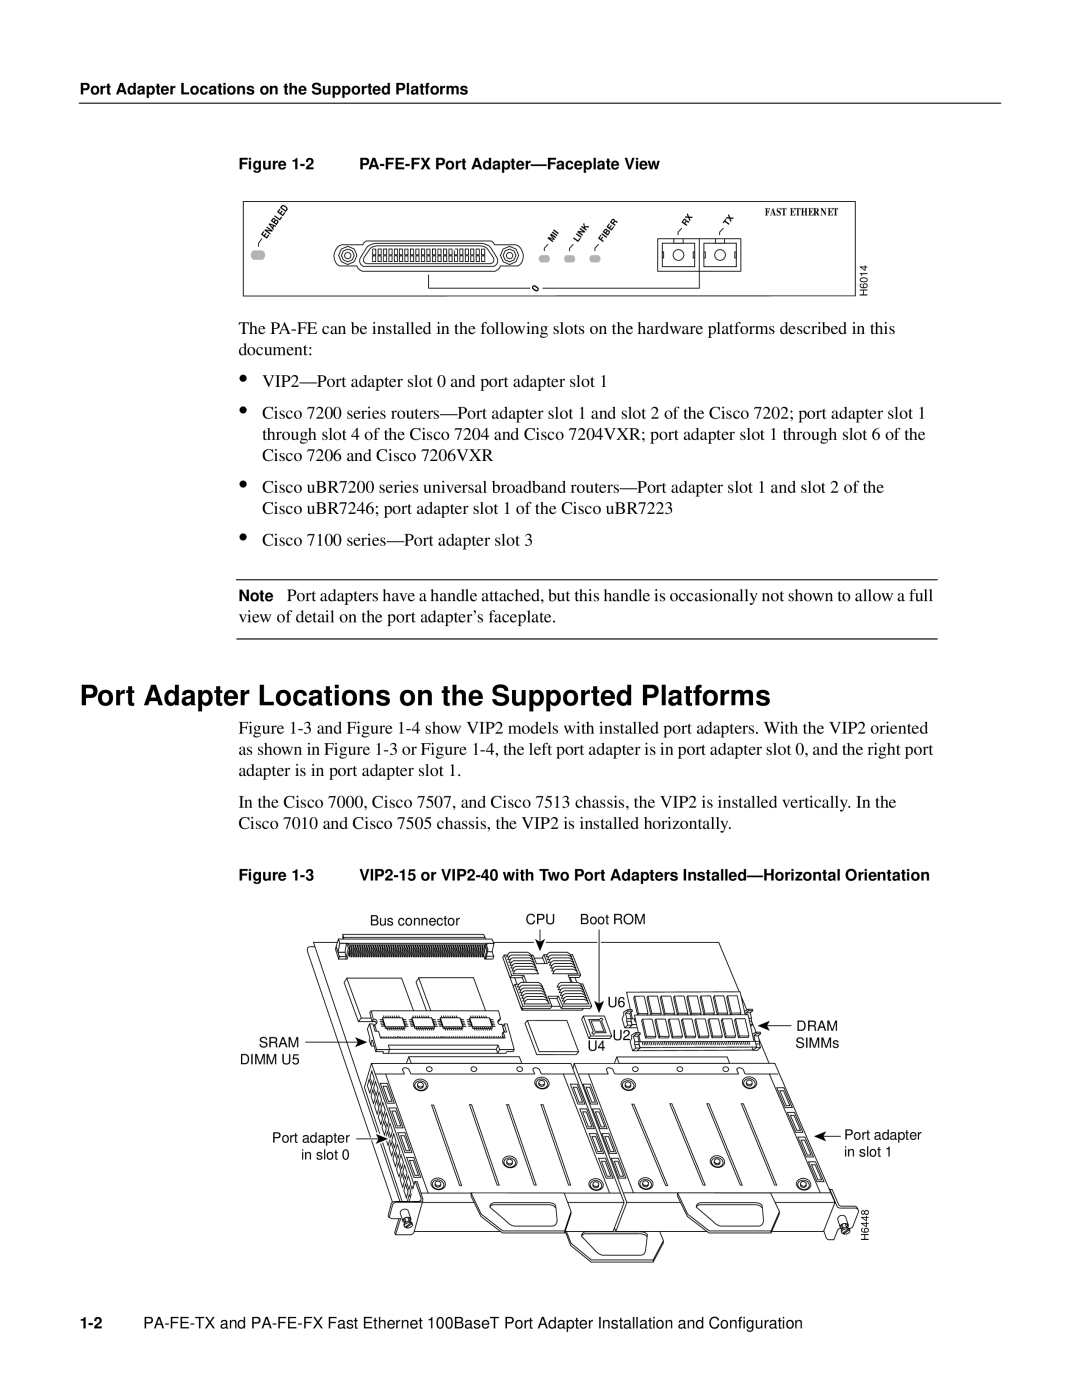 Cisco Systems PA-FE-TX, PA-FE-FX manual Port Adapter Locations on the Supported Platforms 